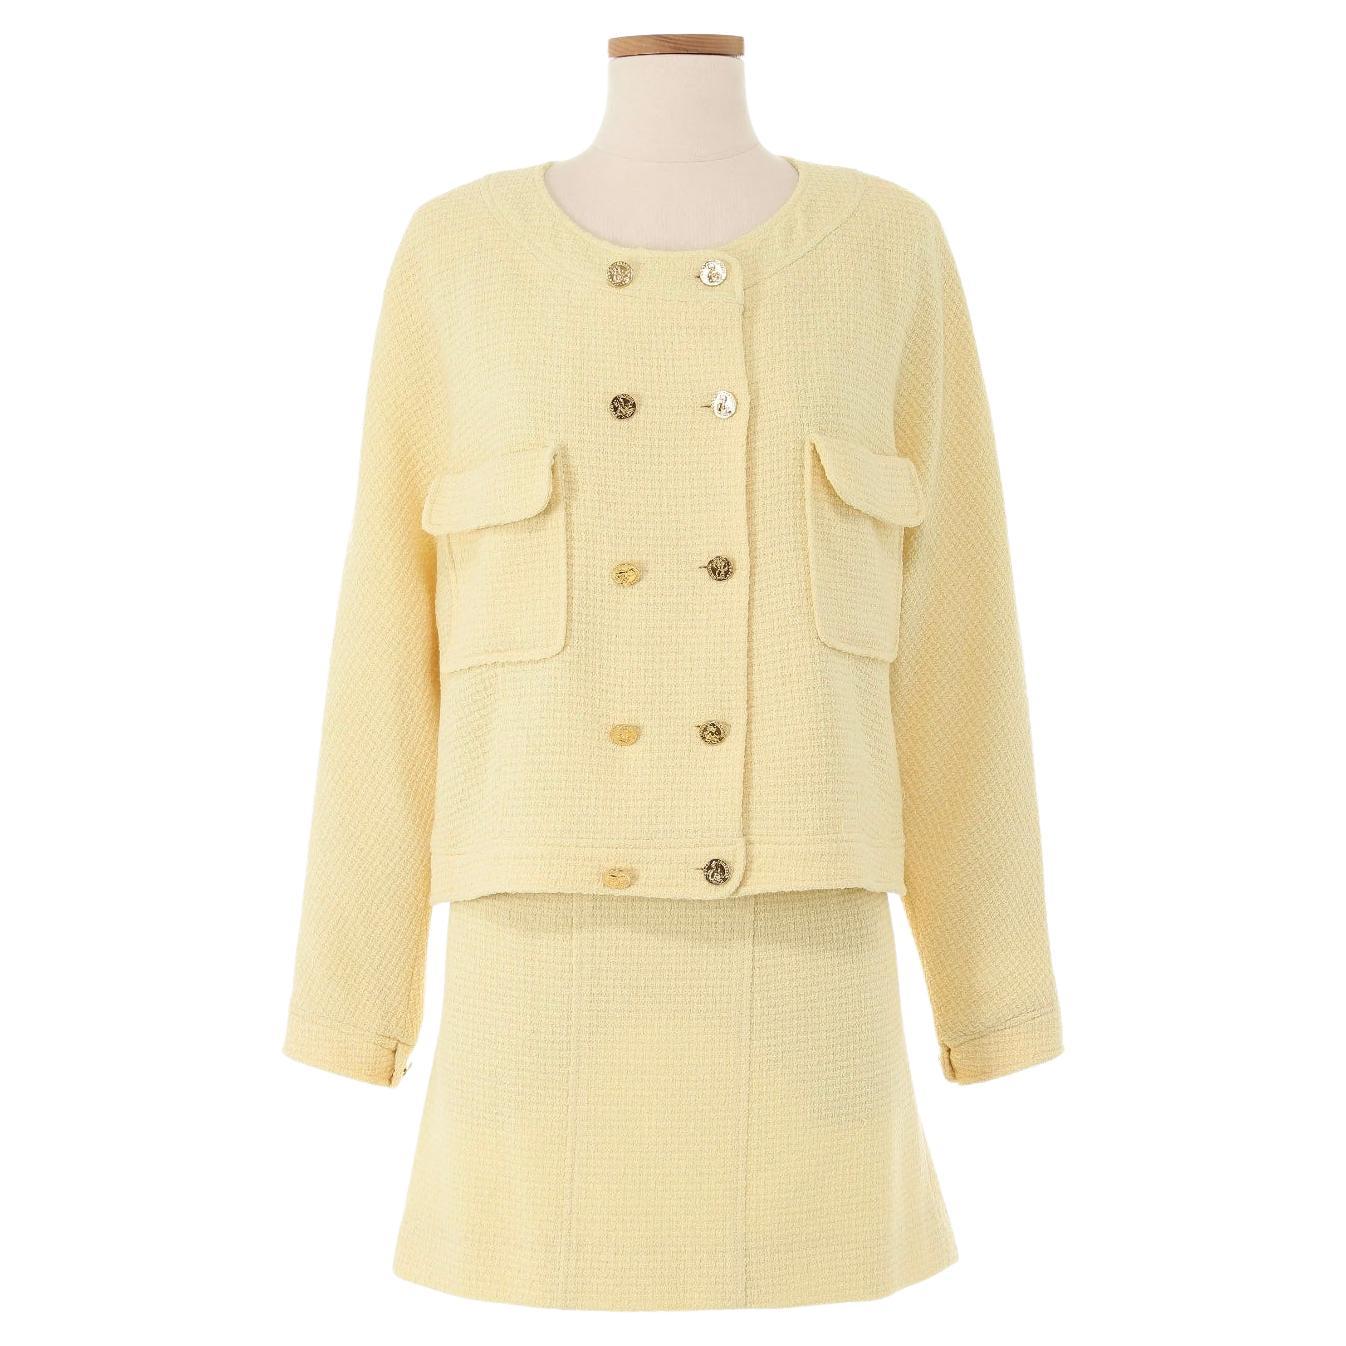 Chanel Yellow Tweed Skirt Suit with Gold Buttons